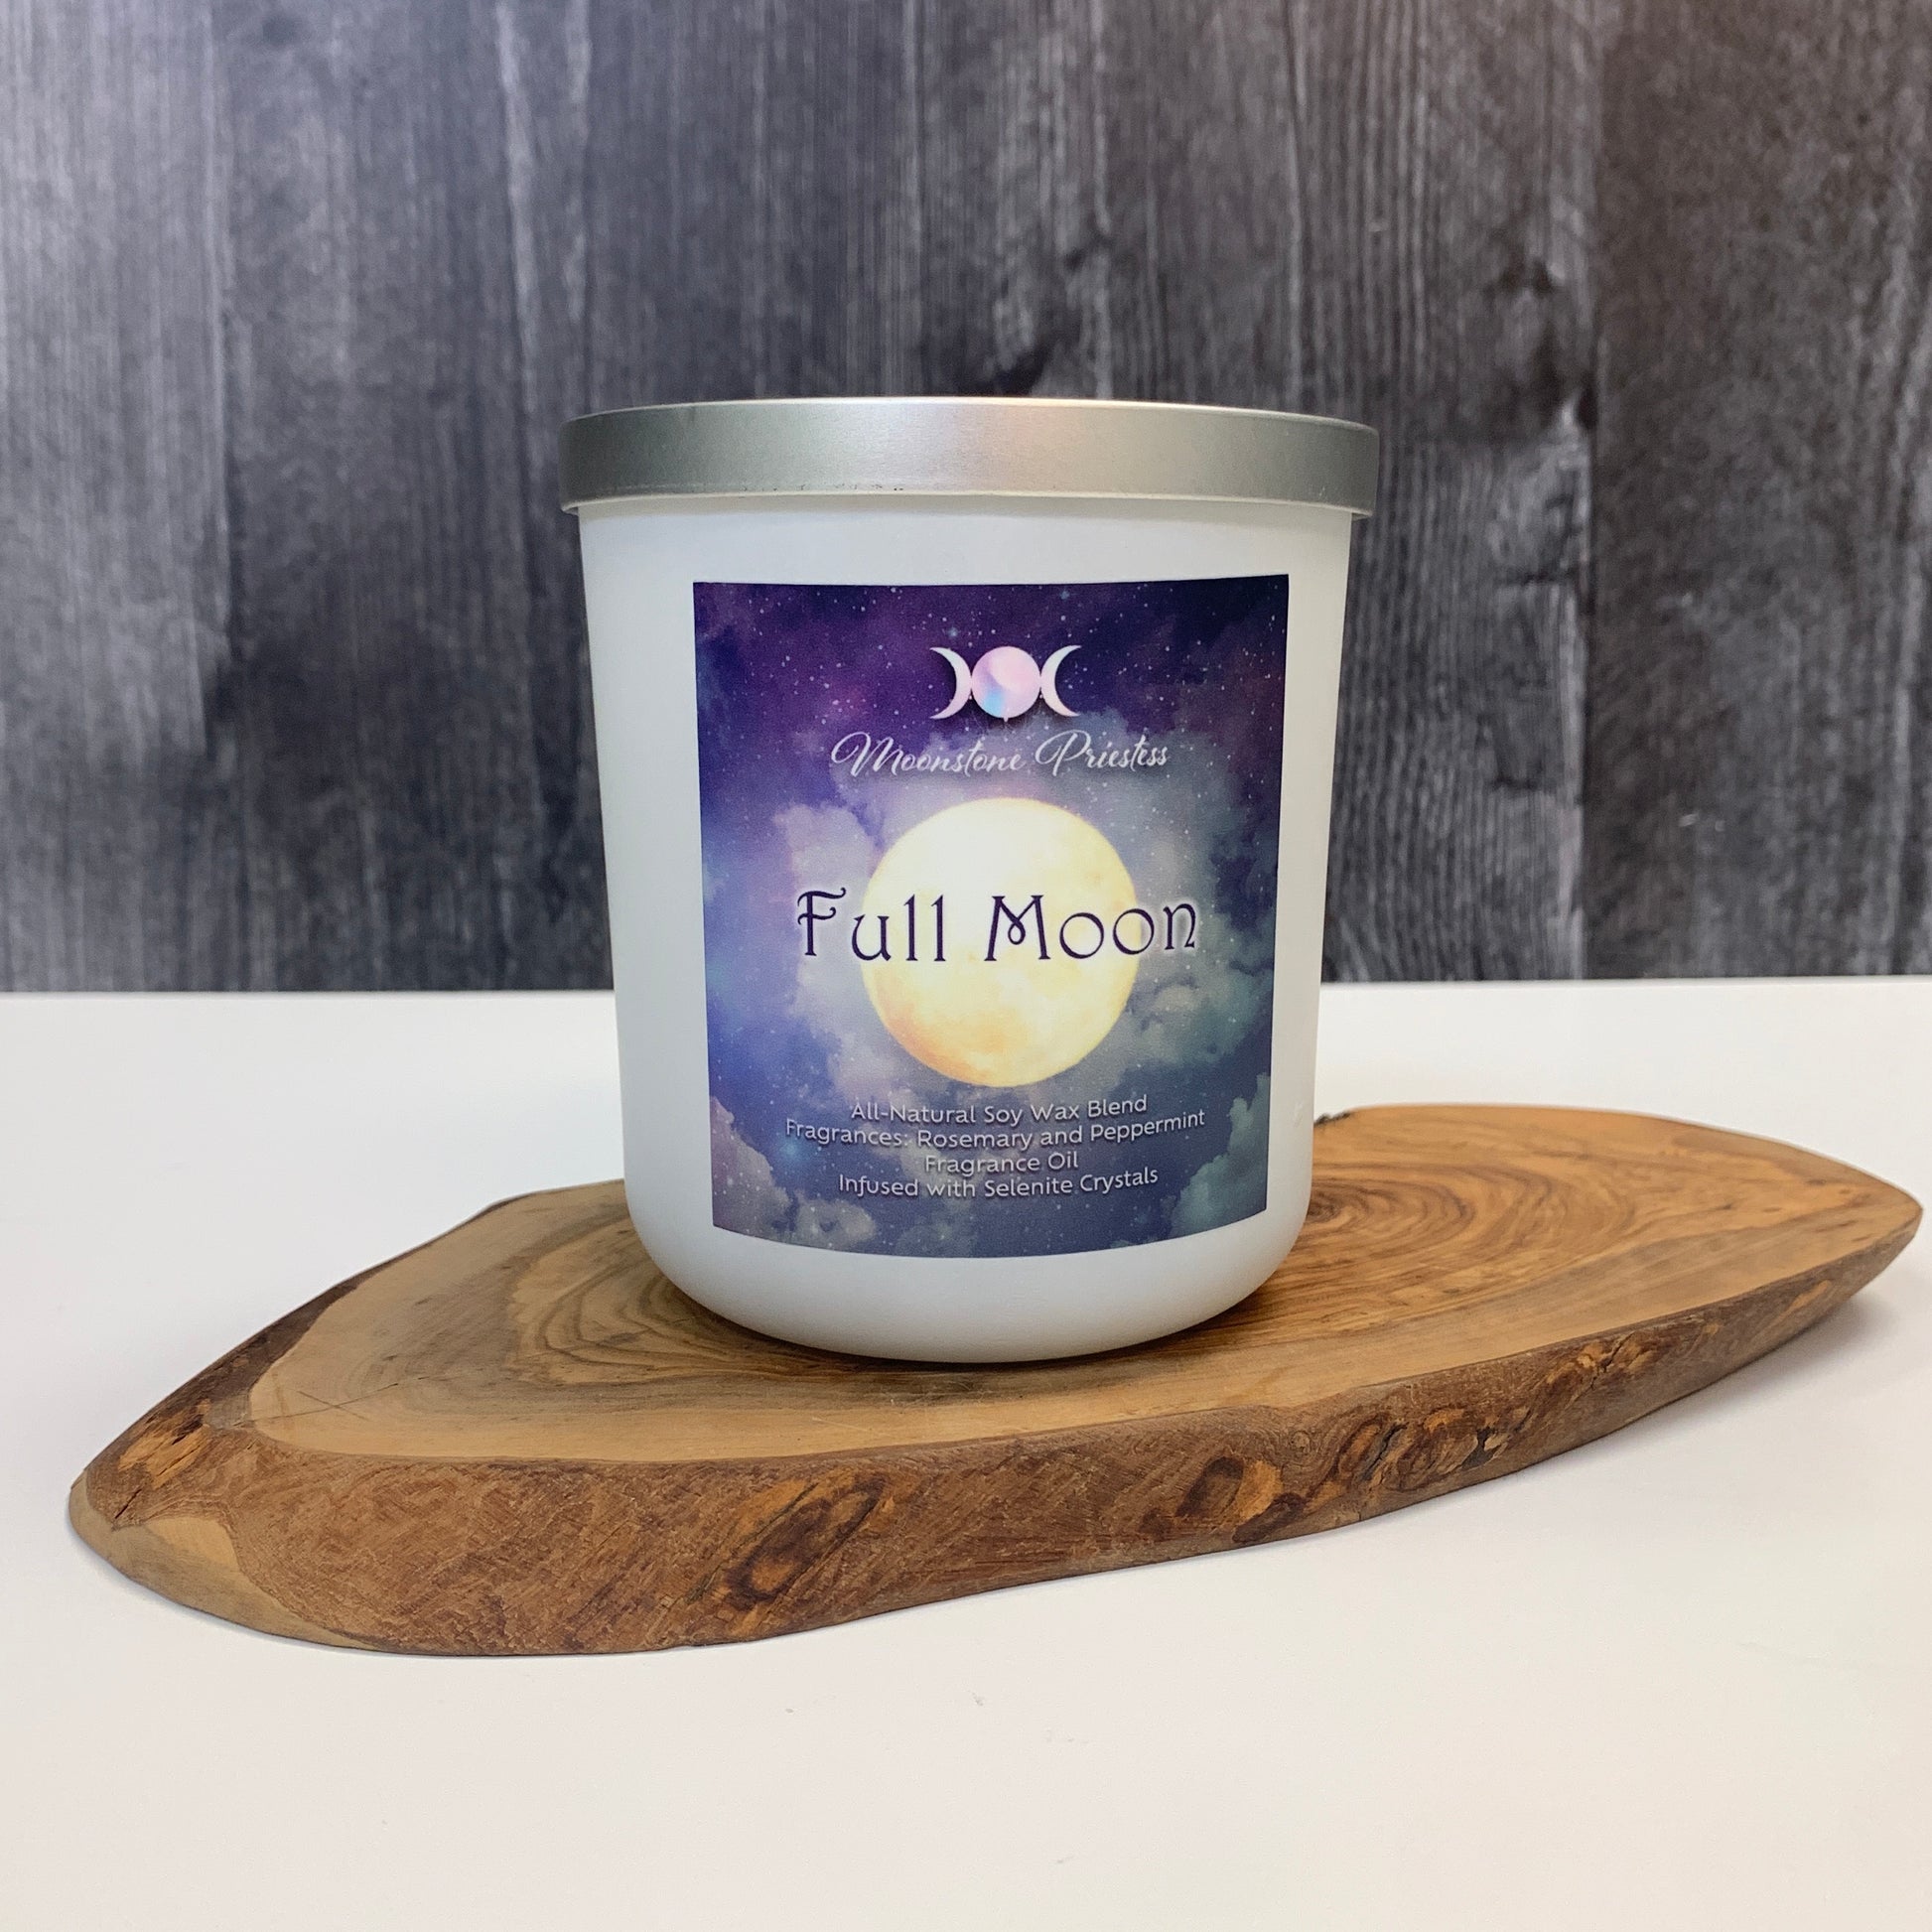 Full Moon Candle with Selenite Crystals